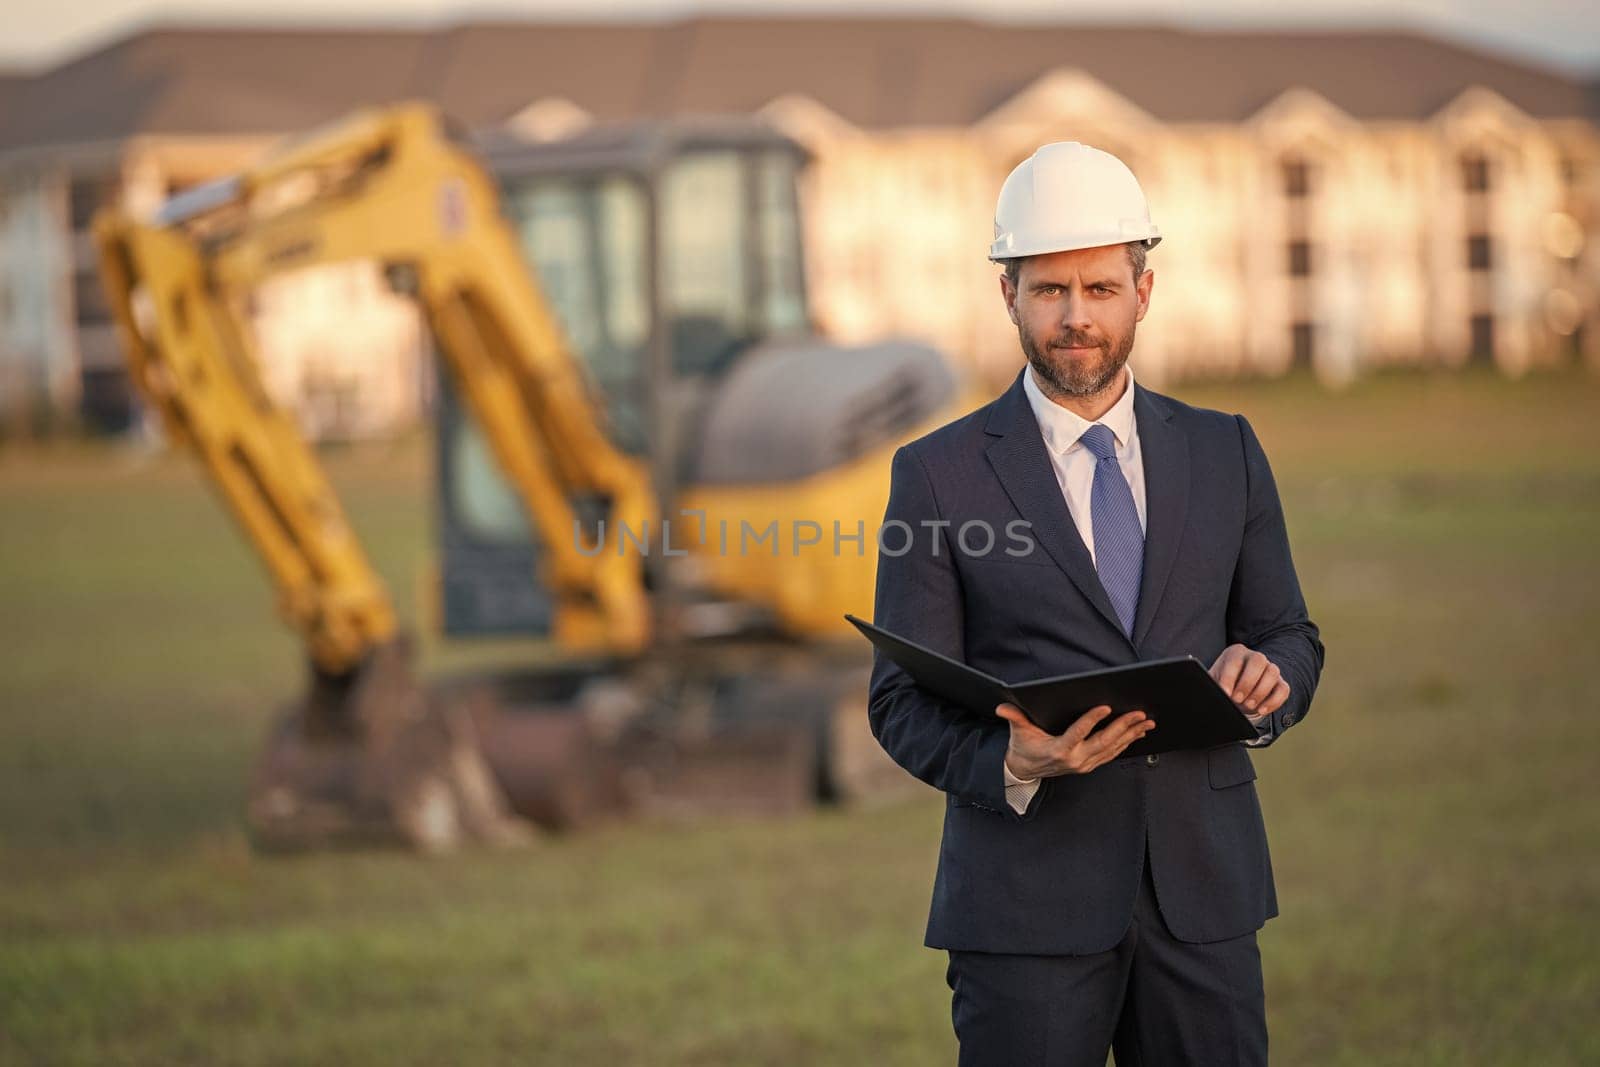 Architect at a construction site. Architect man in helmet and suit at modern home building construction. Architect with a safety vest and suit. Confident architect standing at house background